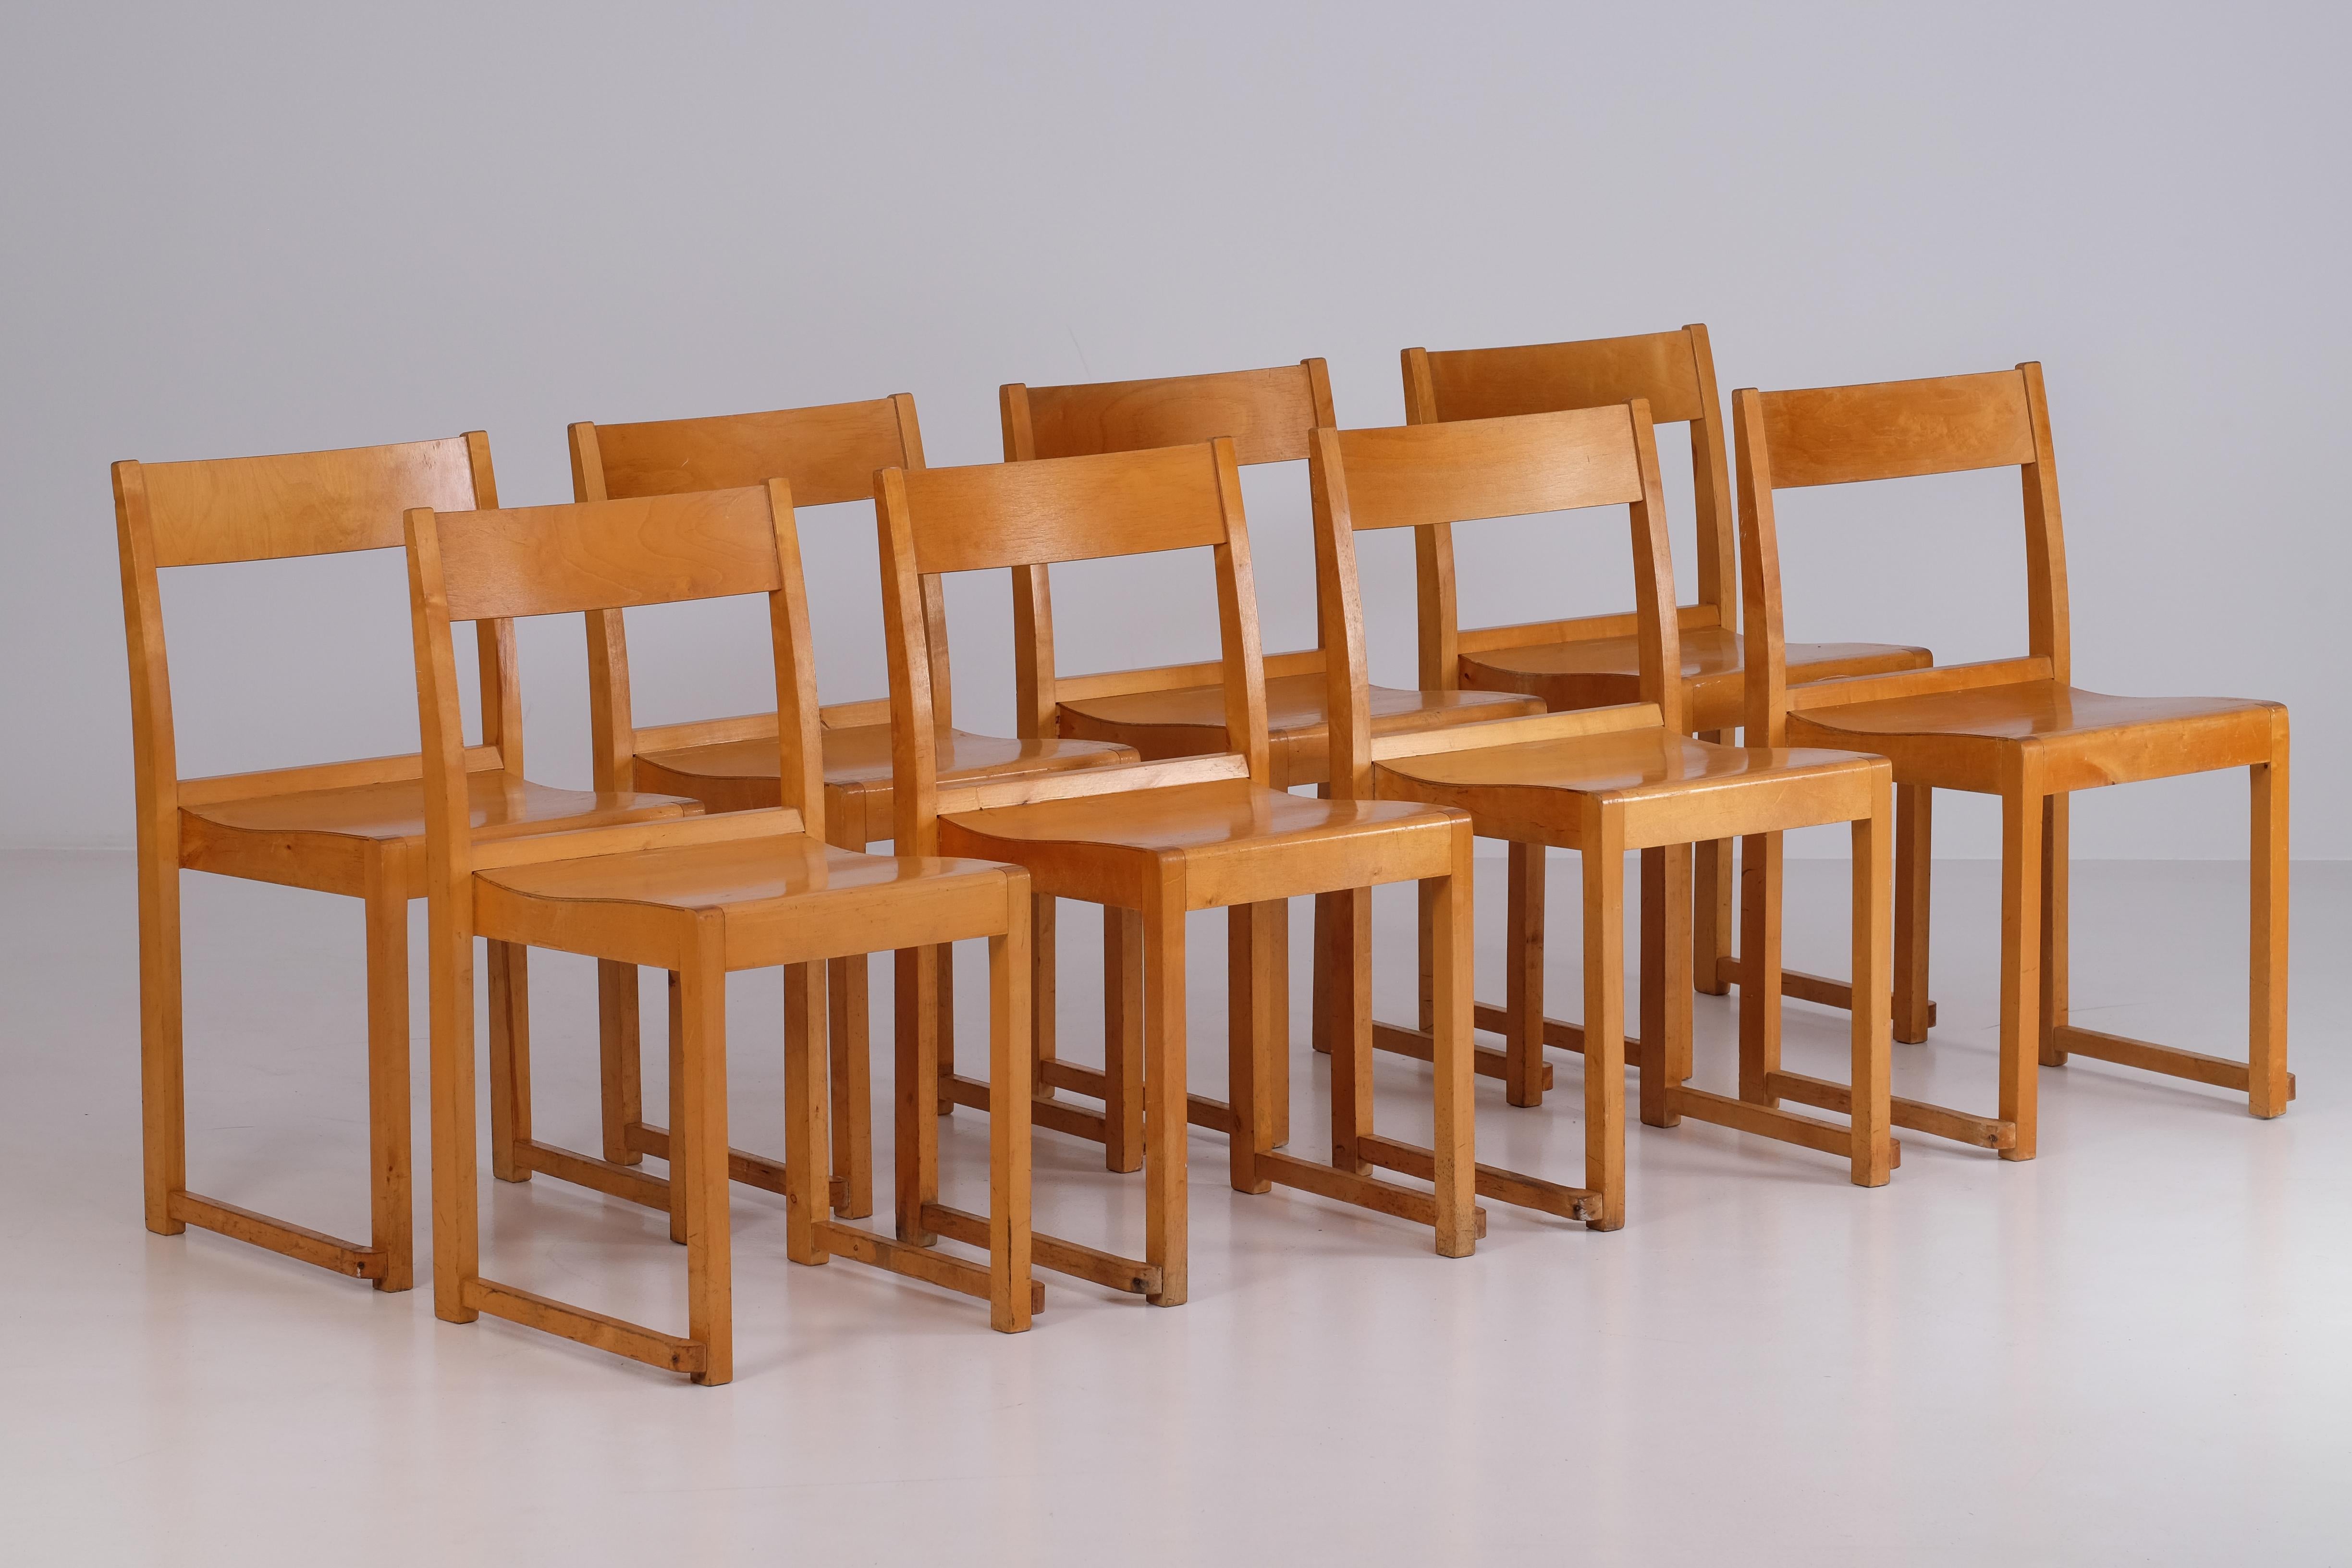 Set of 8 'Orkesterstolen' chairs by Sven Markelius, Sweden, 1940s. 
The chairs were originally designed for Helsingborg Concert Hall.